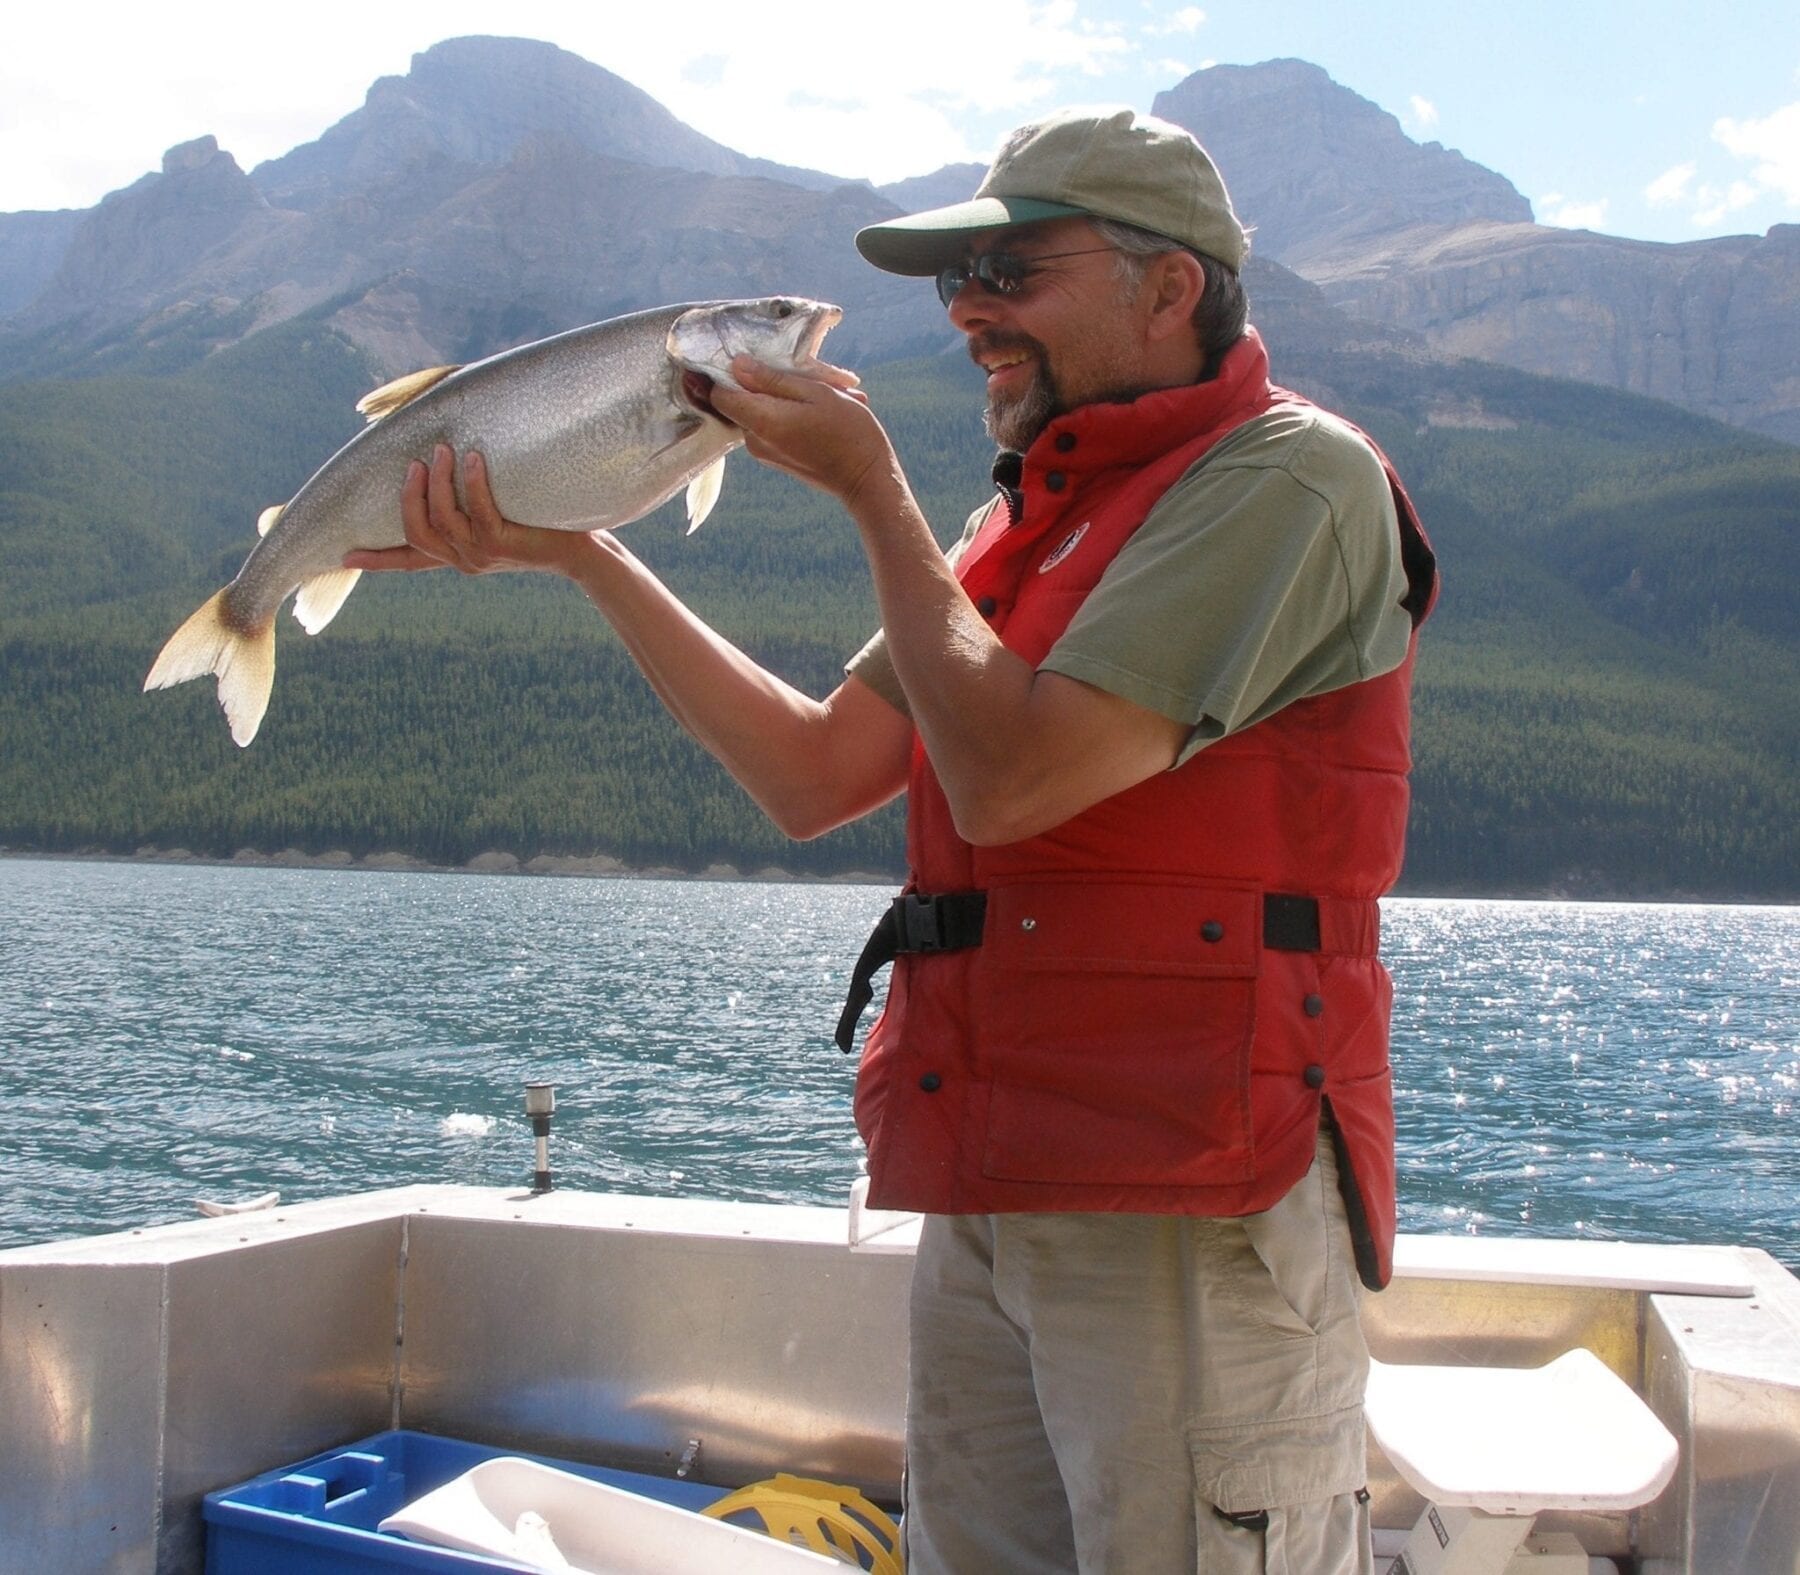 Changes to fisheries legislation have removed habitat protection for most species in Canada